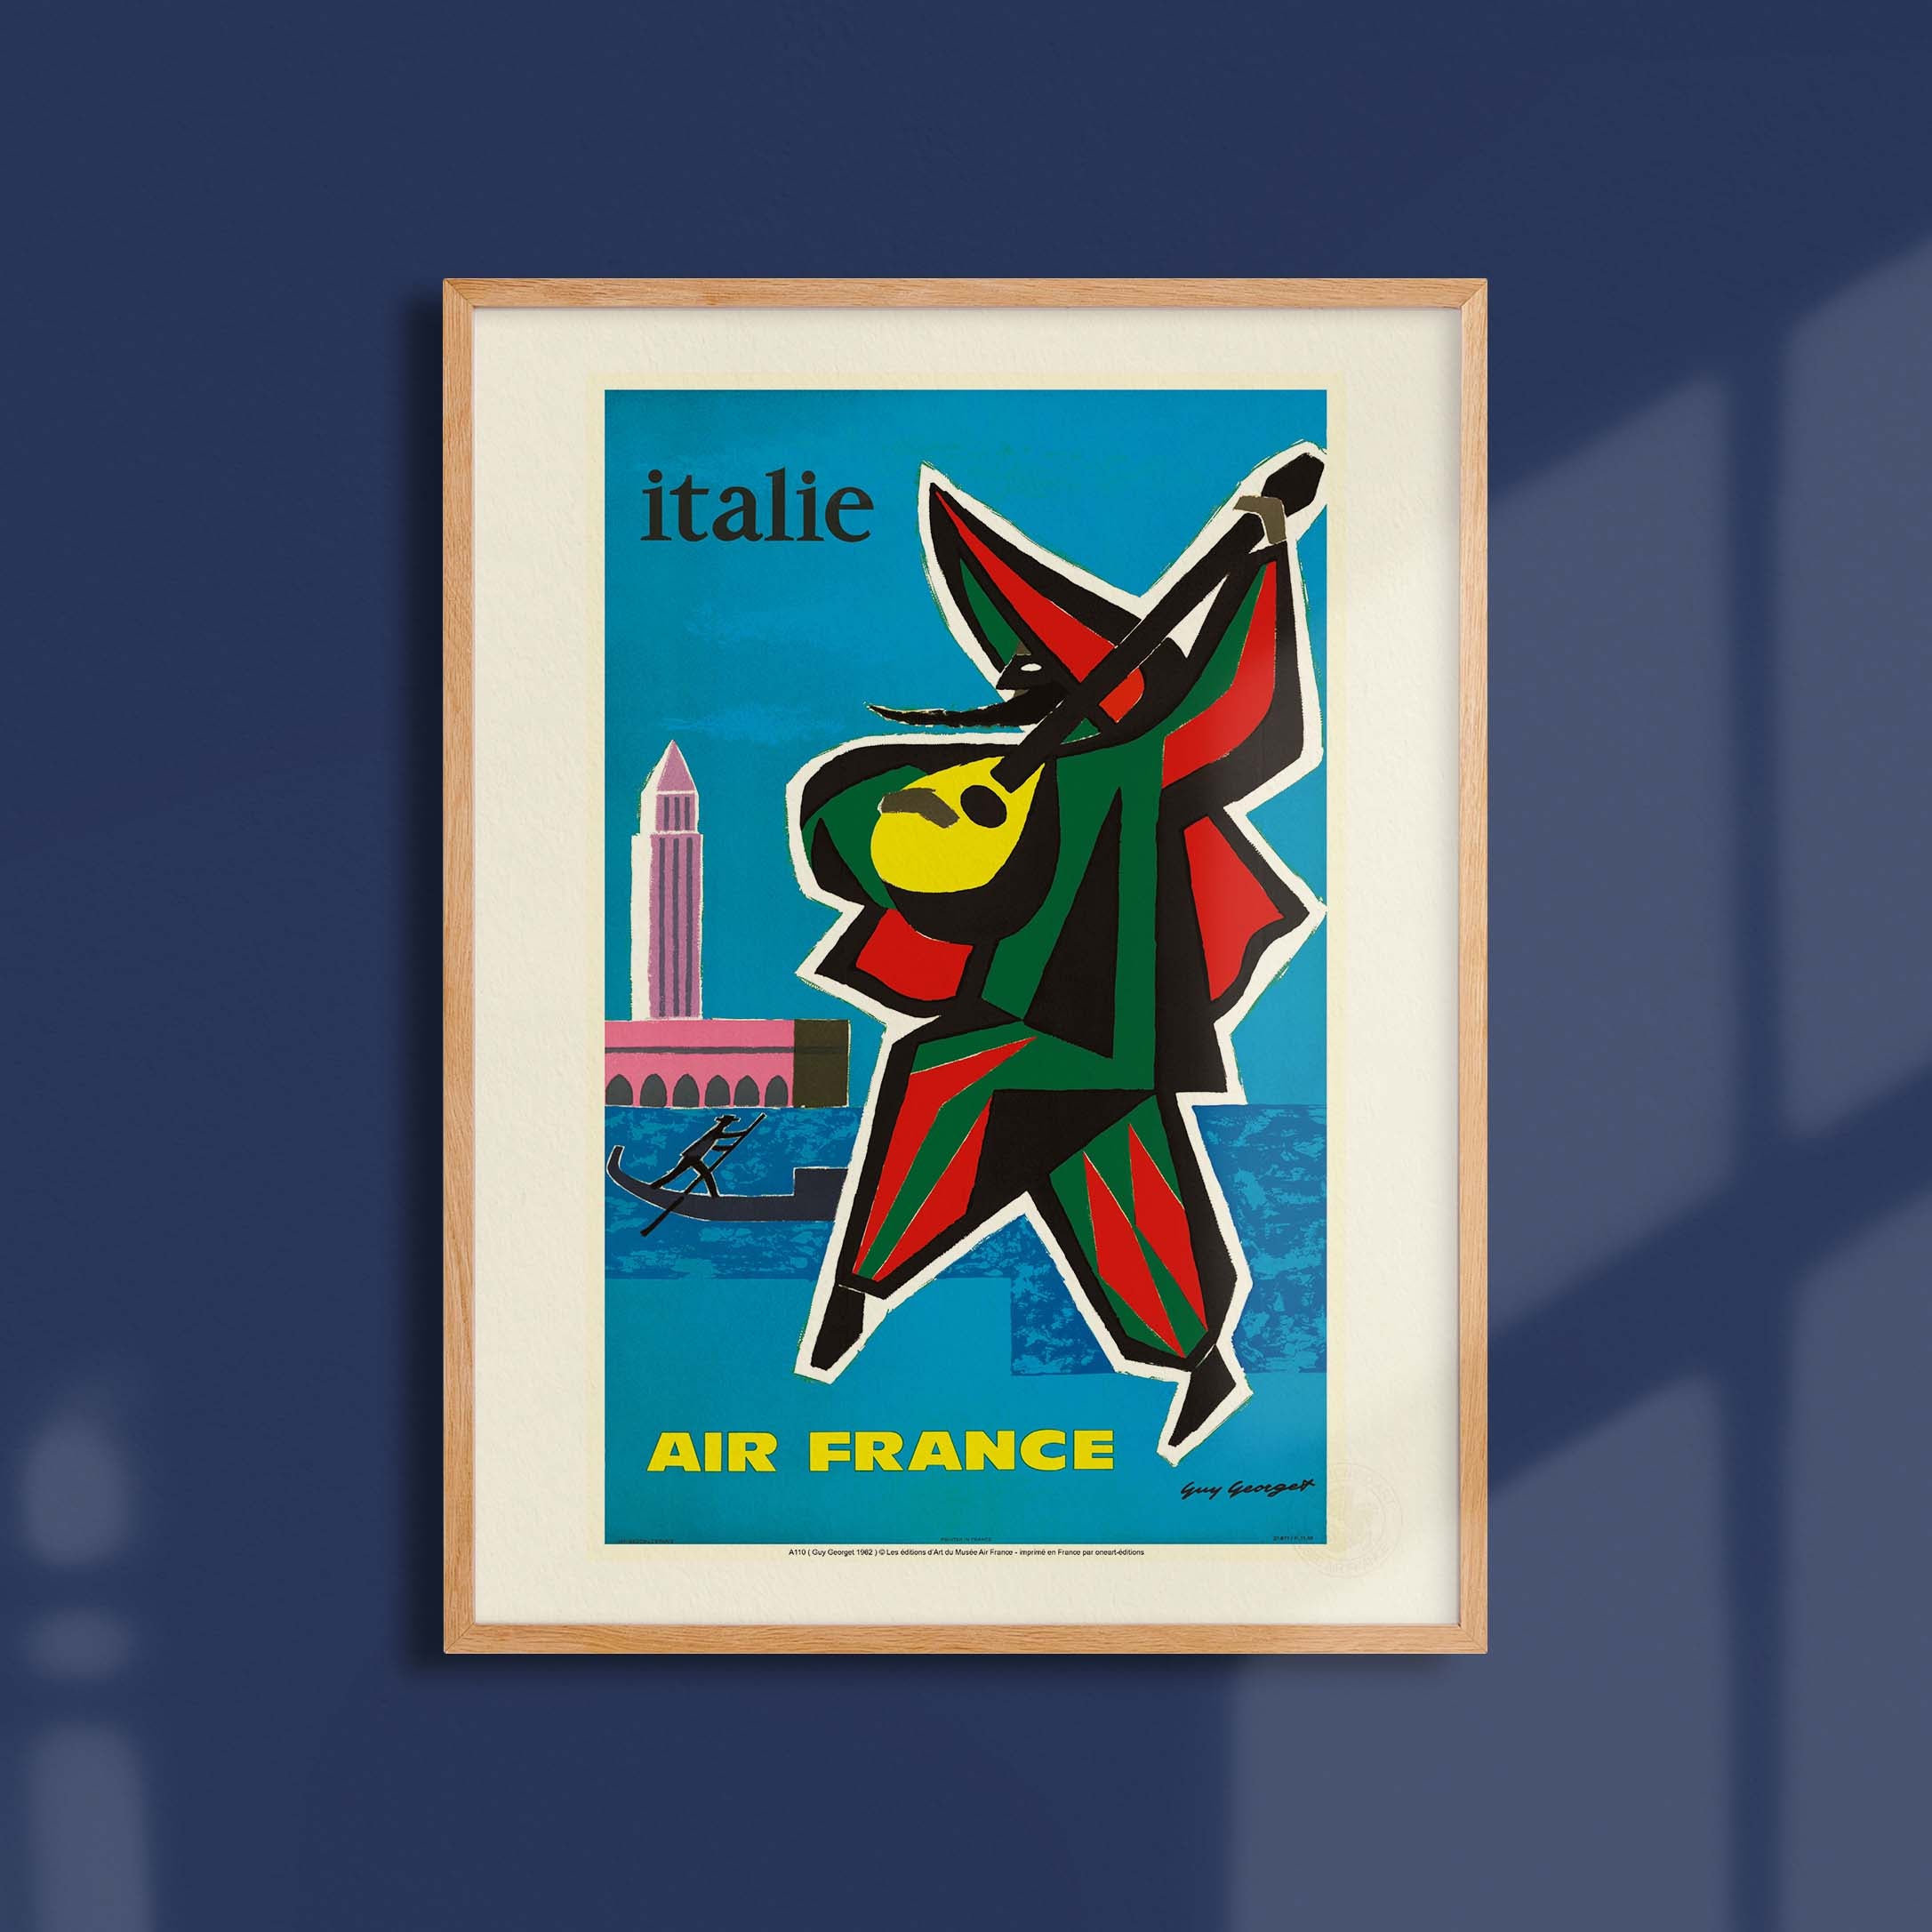 Affiche Air France - Italie-oneart.fr